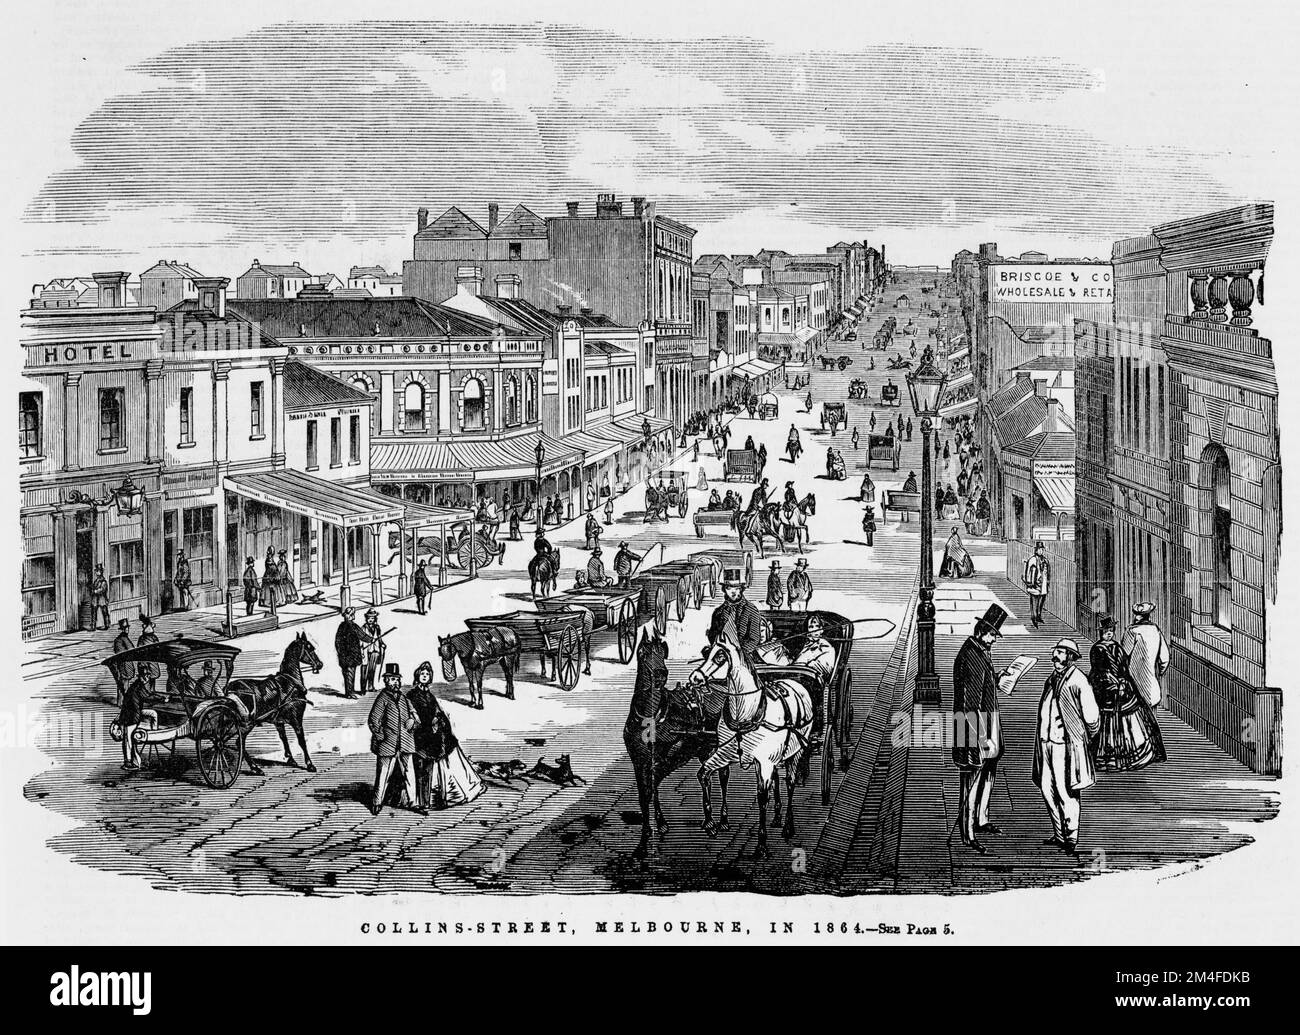 Collins Street, Melbourne in 1864. Shows view of street looking west, with streetscape including horsedrawn vehicles, pedestrians and Briscoe and Company building. Stock Photo